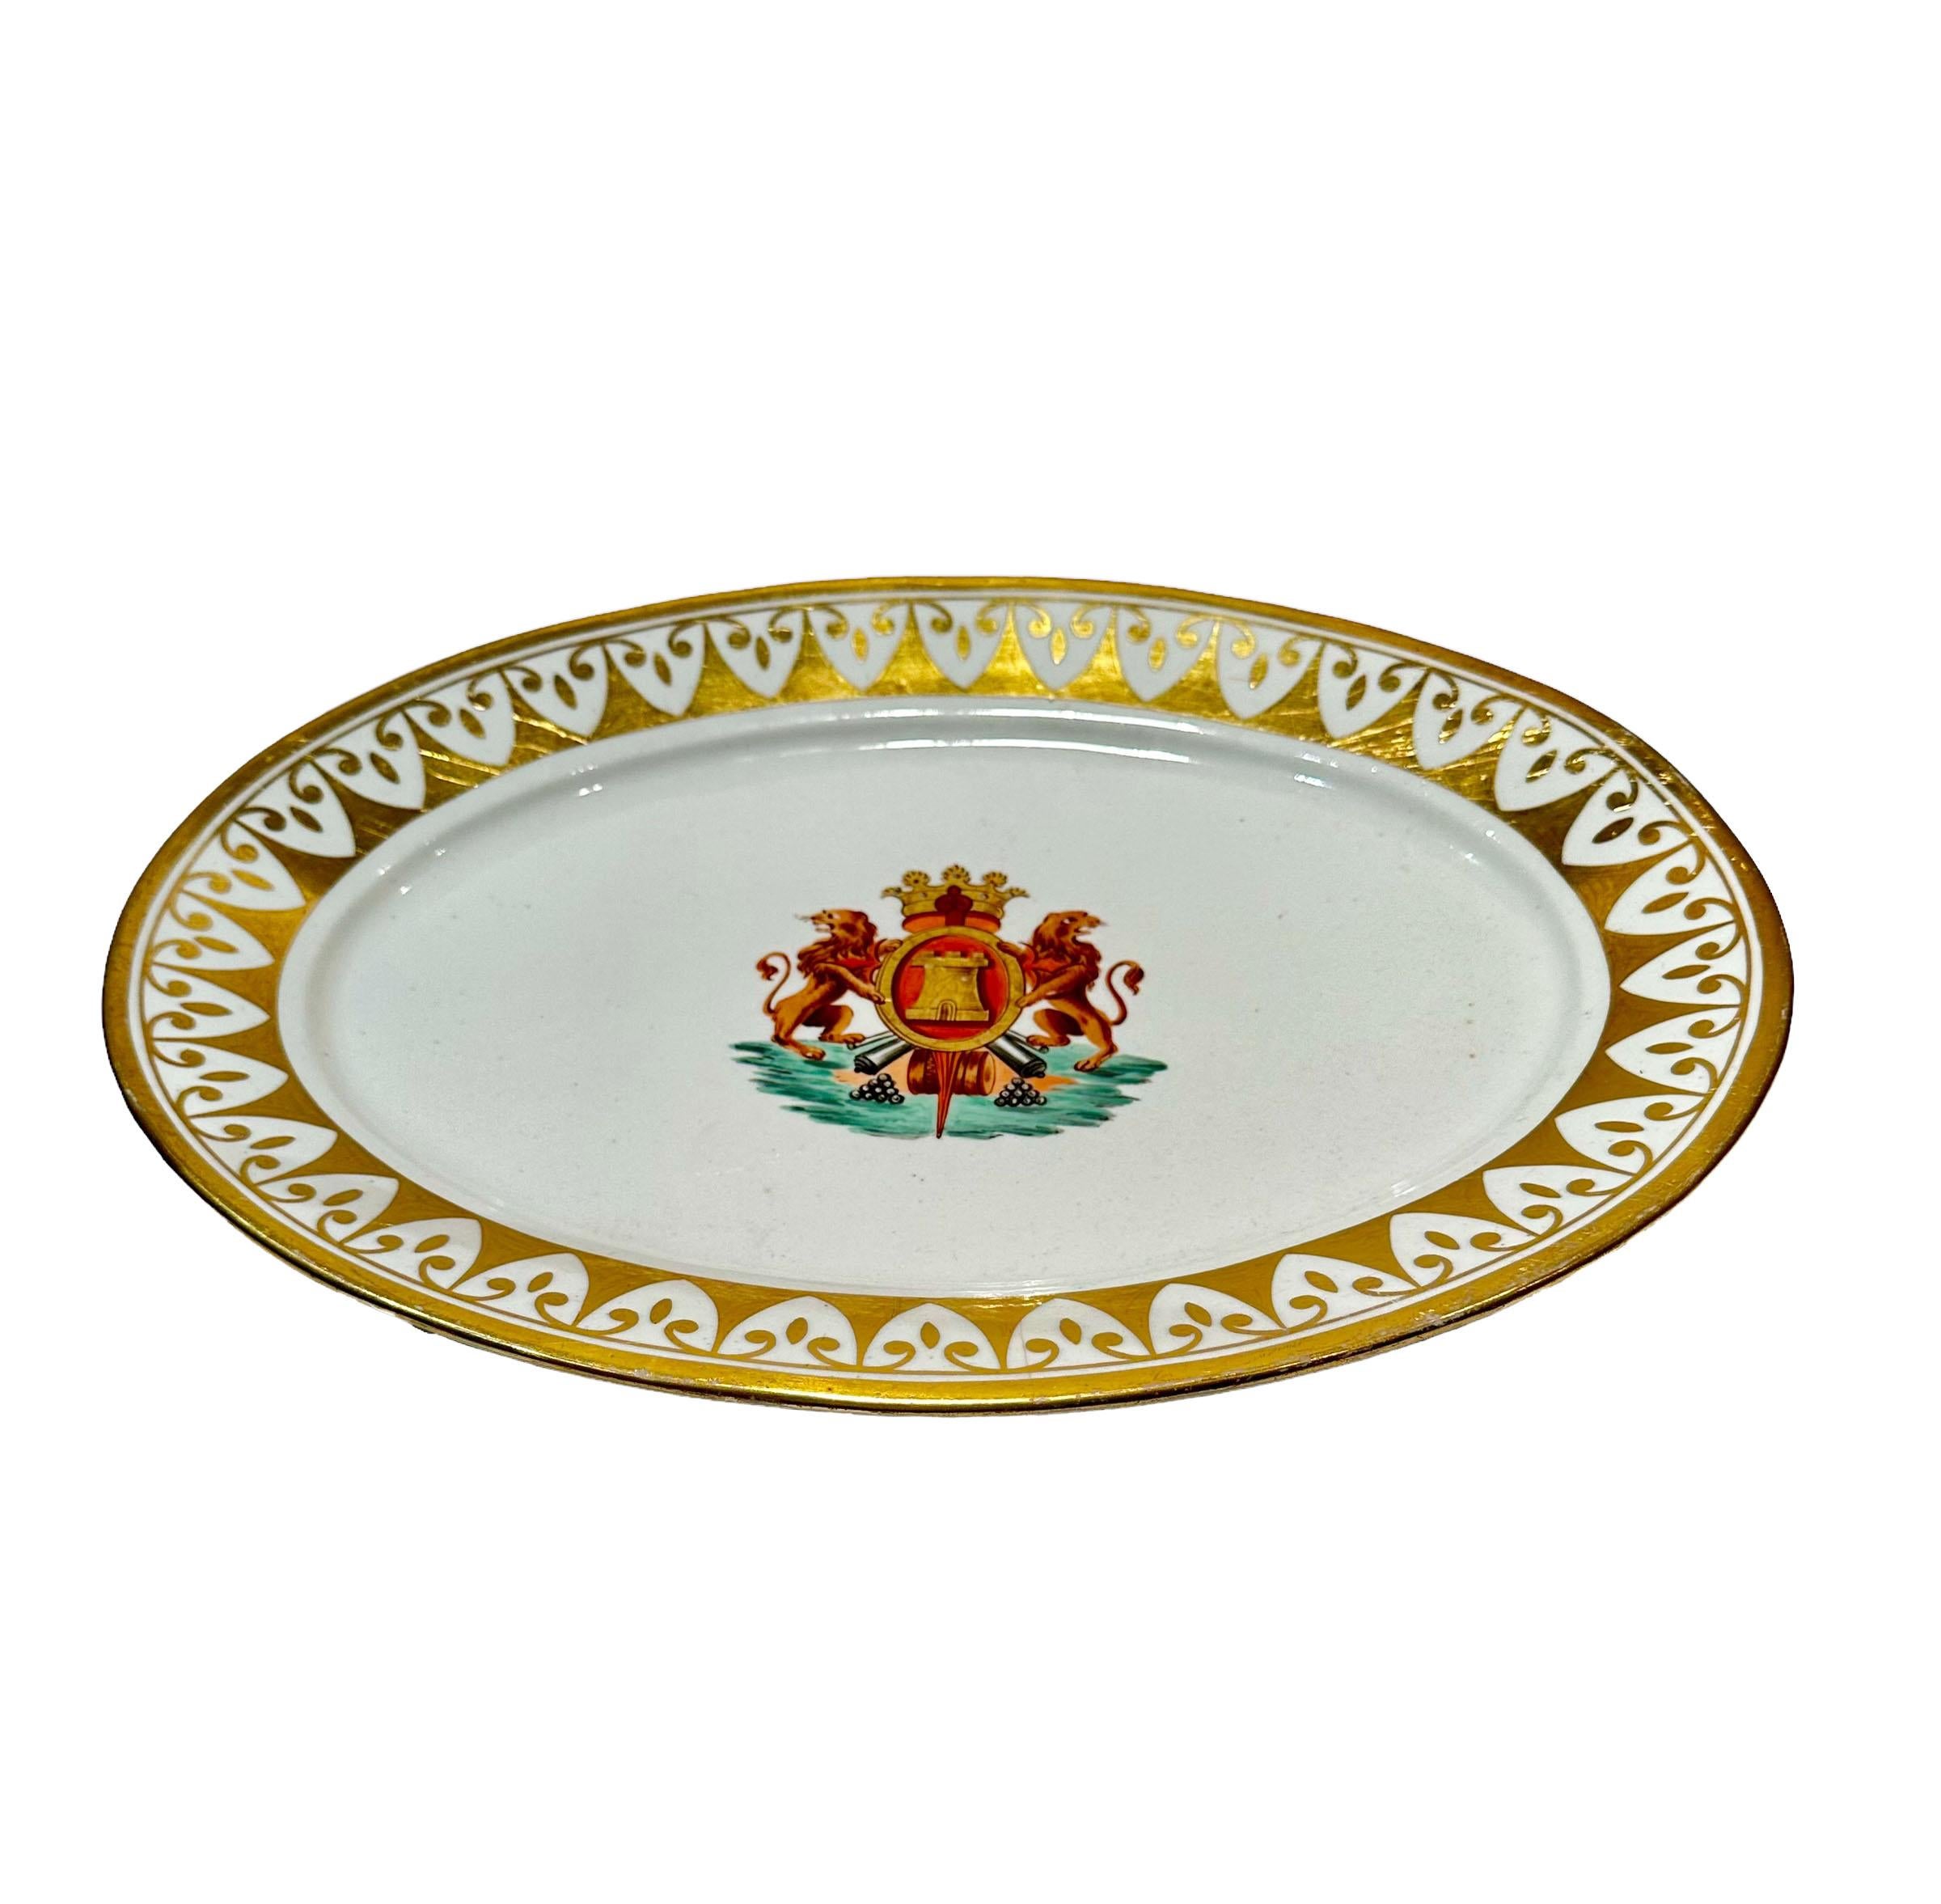 Large Coalport platter with coat of arms center and a fabulous border of gold gilt. Circa 1850s to 1890s, England.